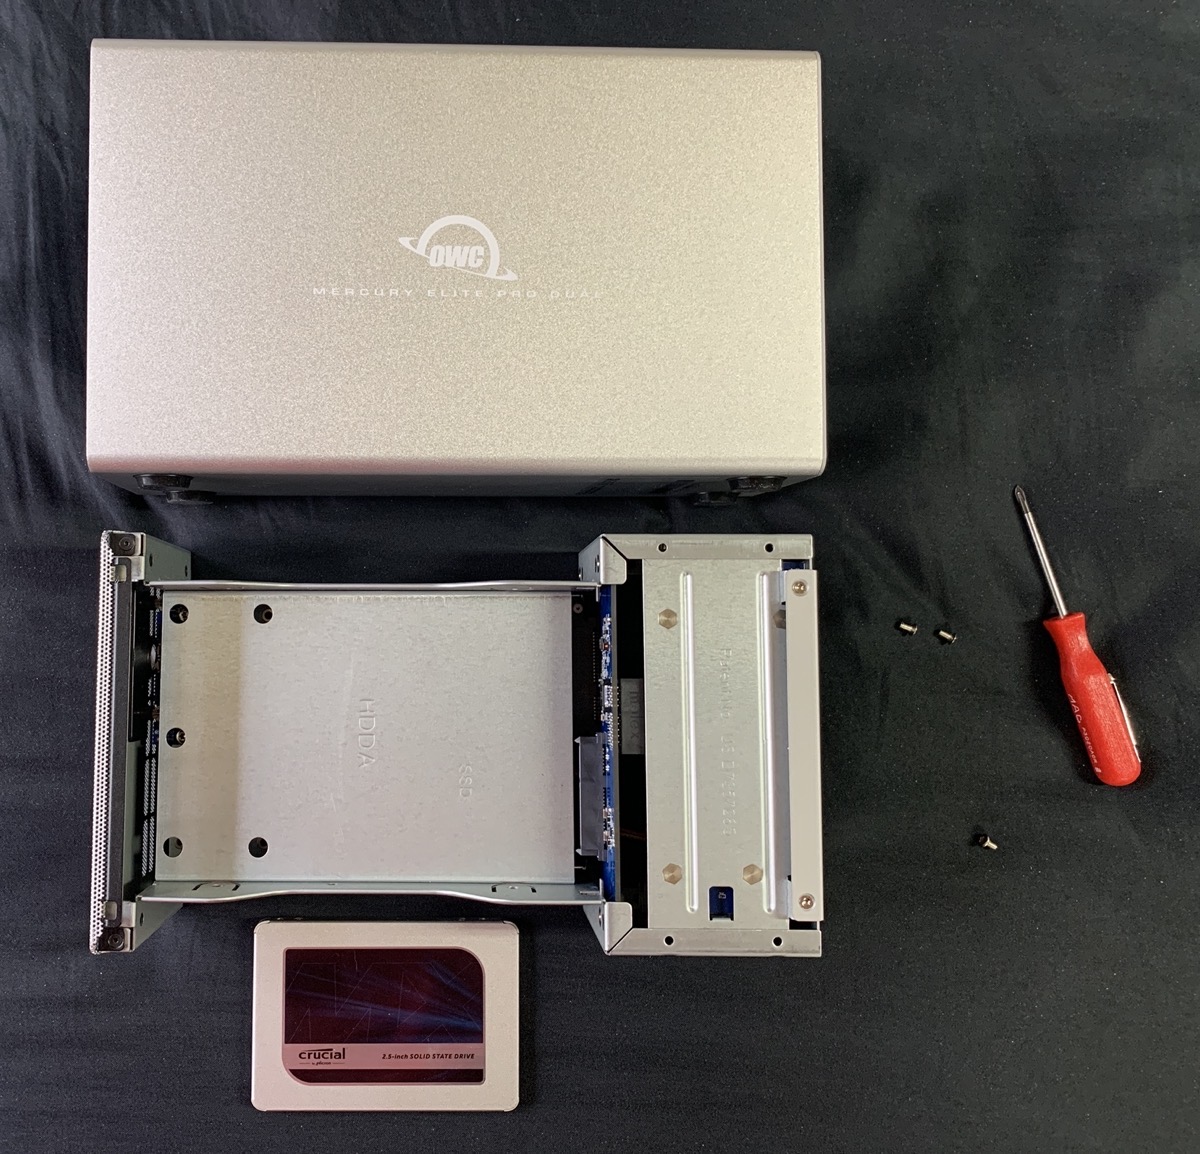 Disassembly with SSD and screwdriver